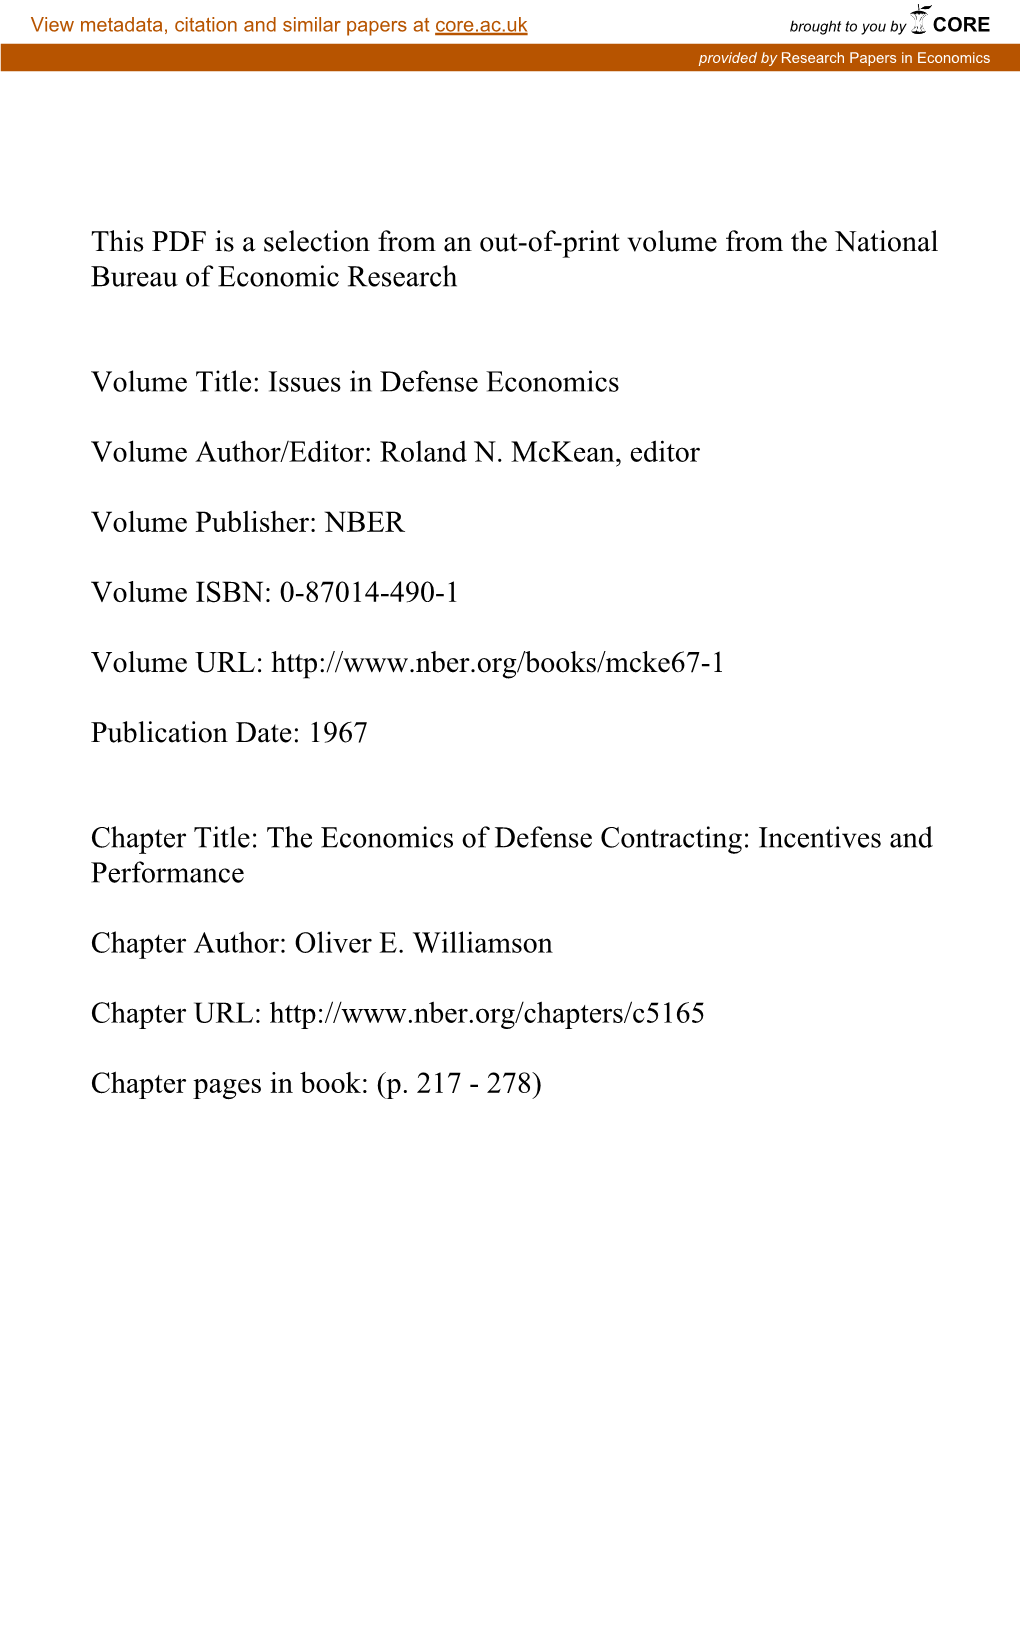 The Economics of Defense Contracting: Incentives and Performance